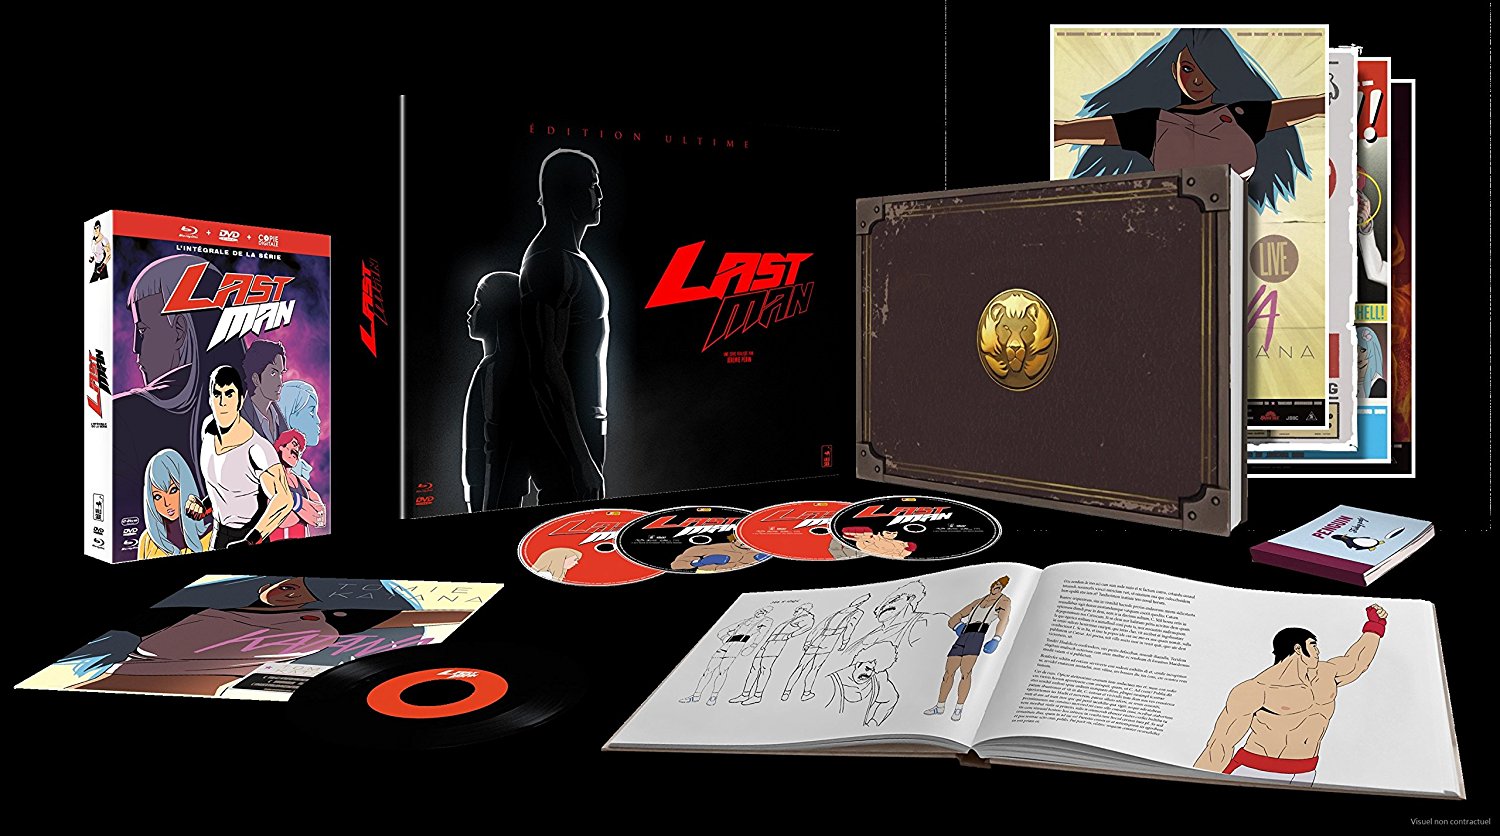 Lastman-coffret-Integrale-serie-edition-collector-Ultime-Limitee-Blu-ray-DVD